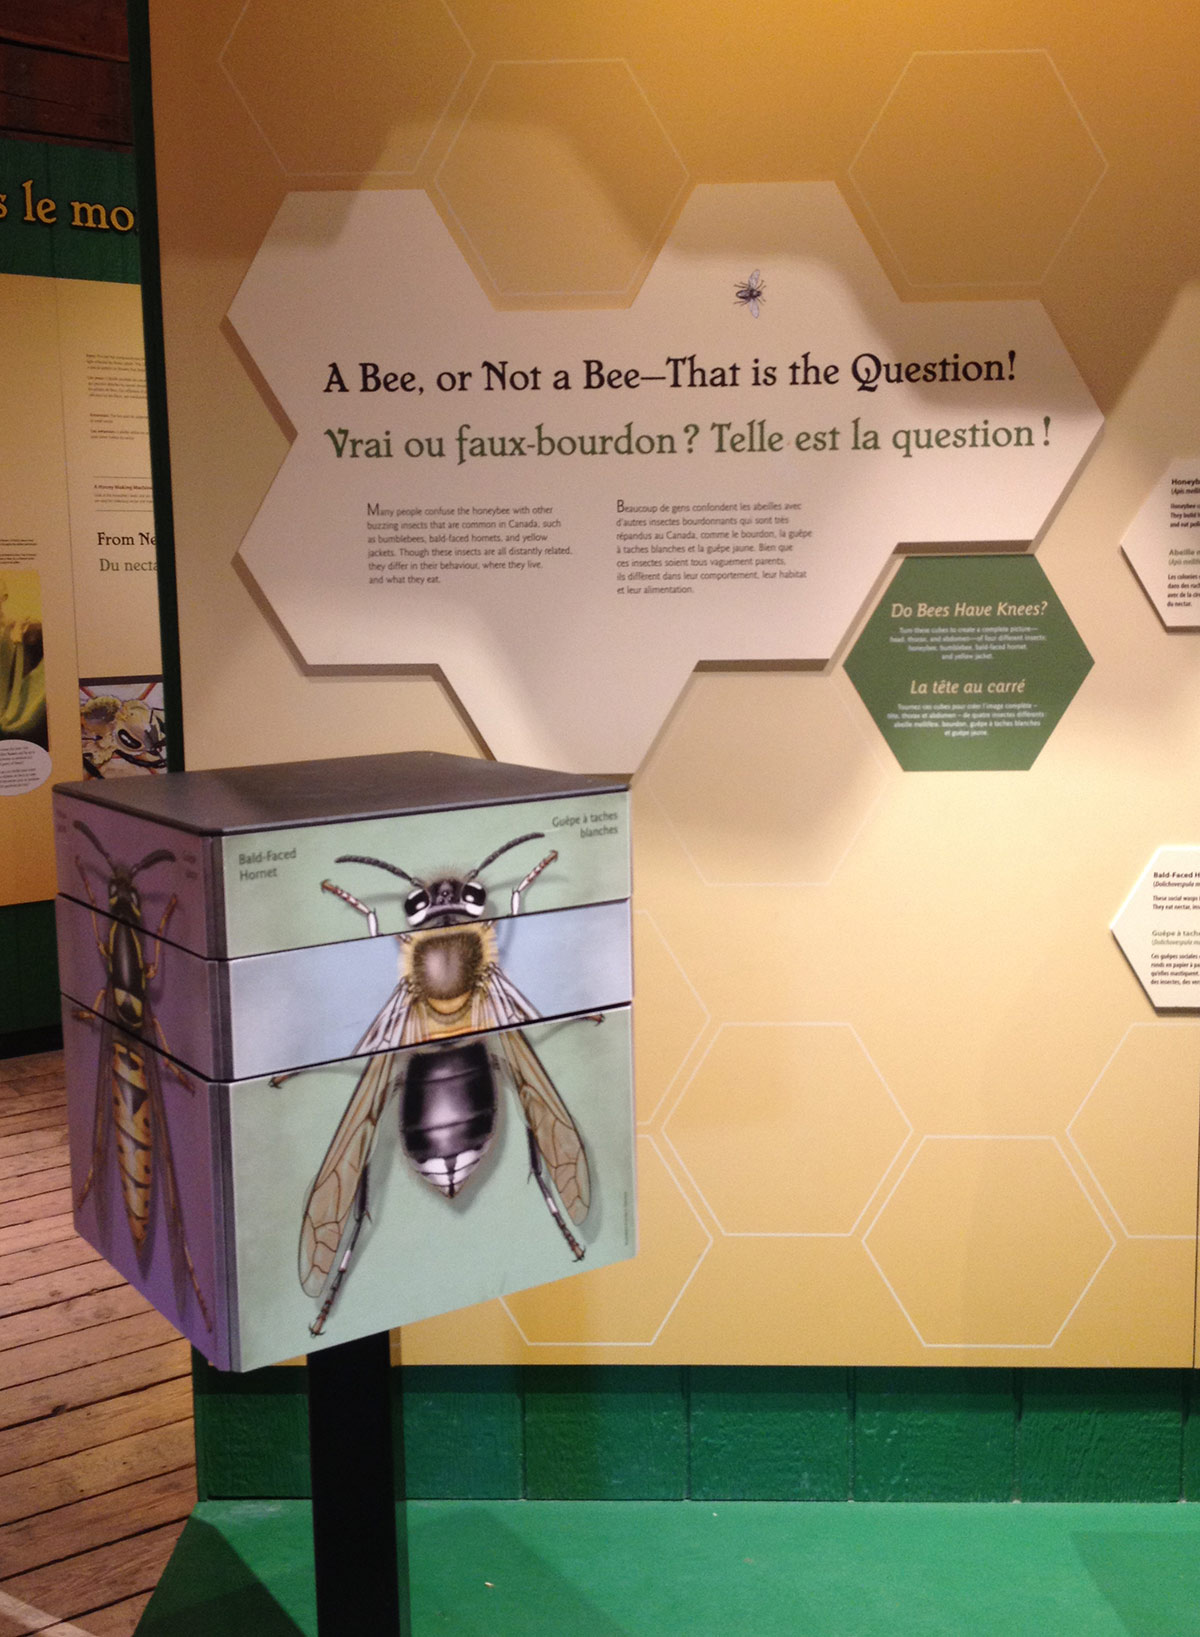 Bee exhibit at the Canadian Museum of Agriculture